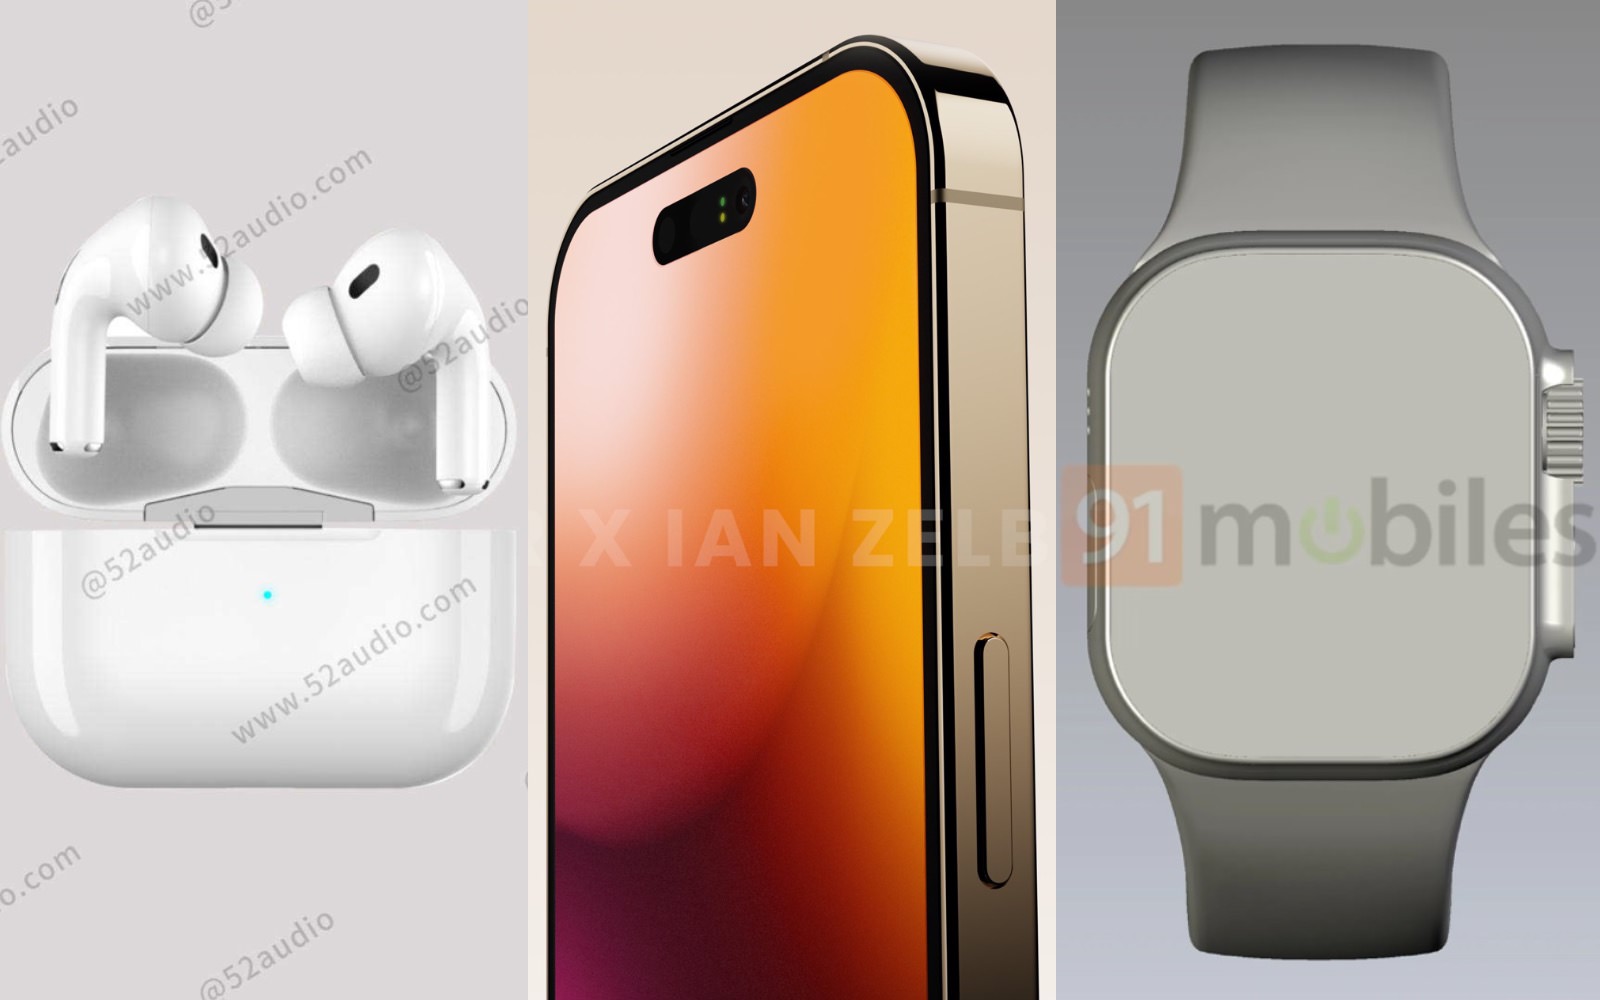 Expected Hardware at FarOut Apple event